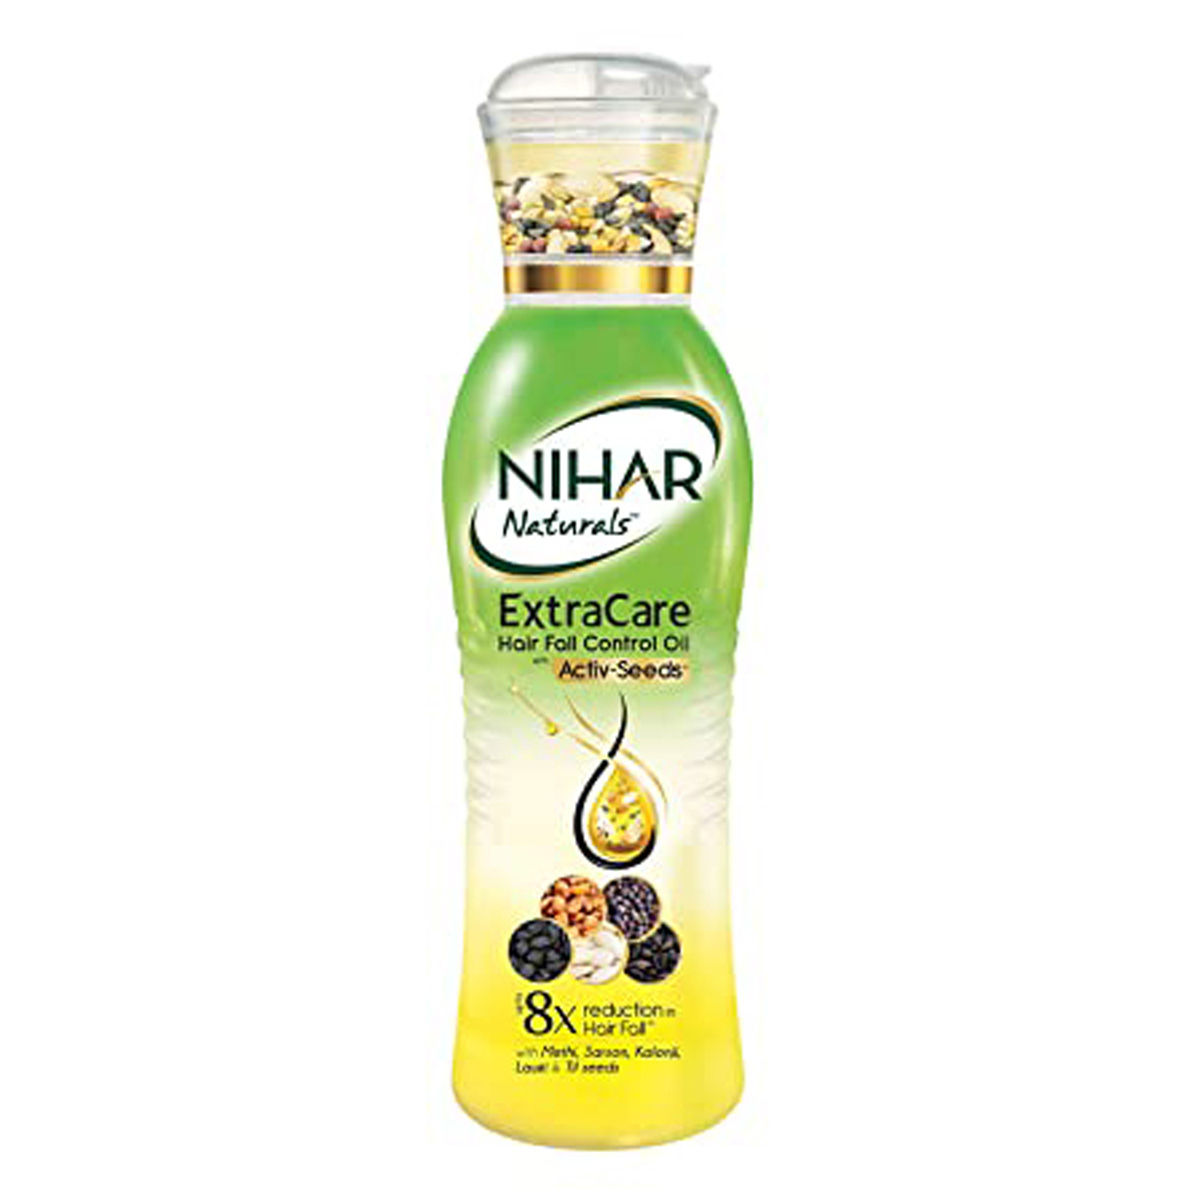 Buy Nihar Naturals Extra Care Hairfall Control Oil, 100 ml Online